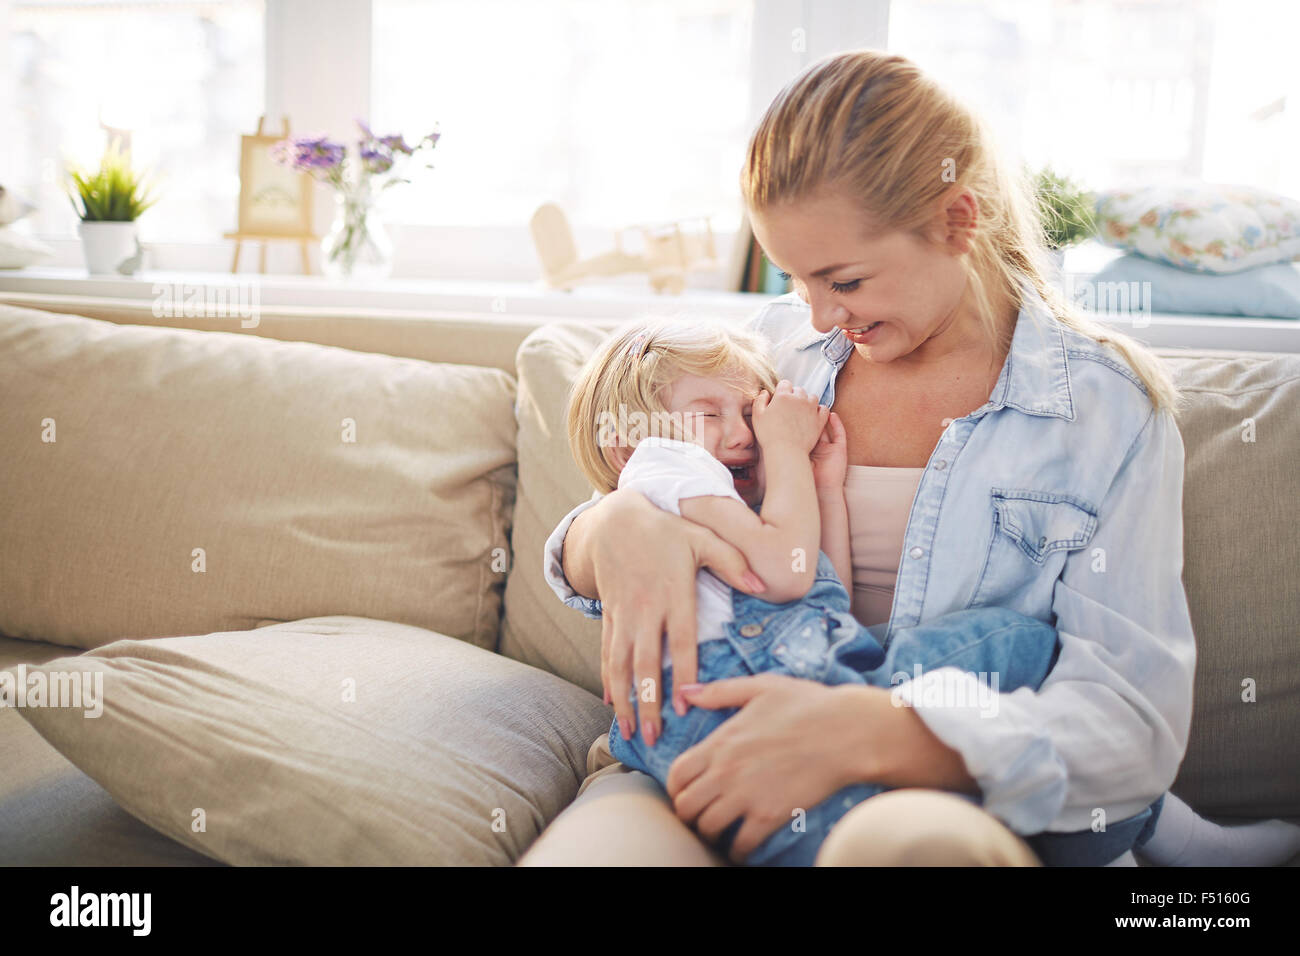 Young woman reassuring her small crying daughter Stock Photo